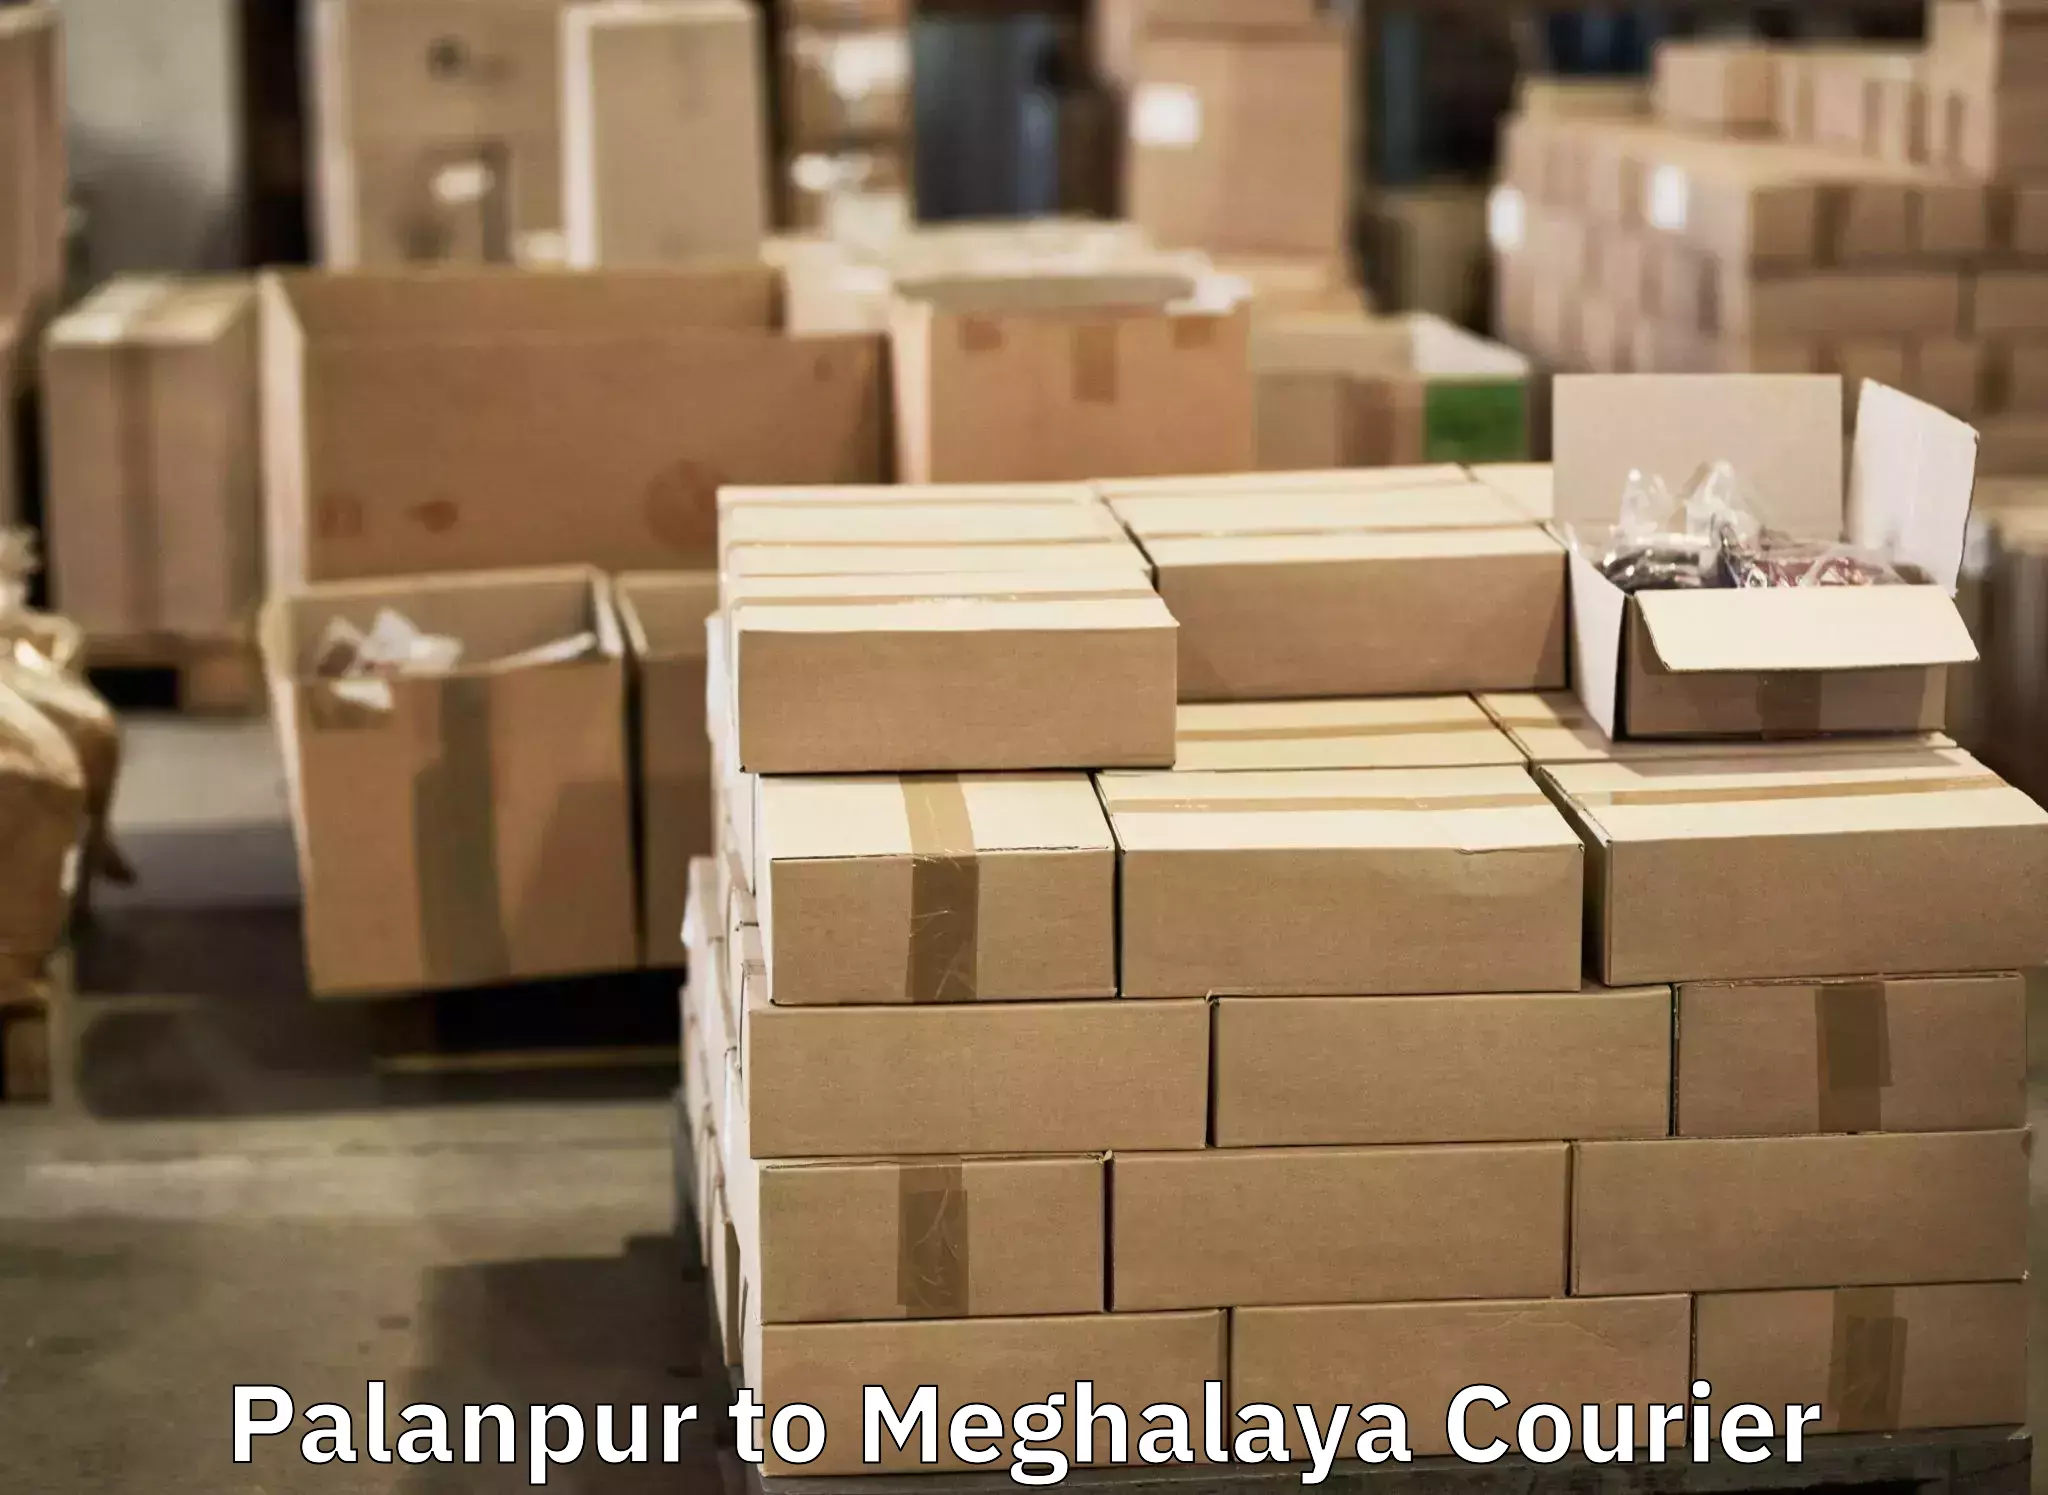 Luggage shipment specialists Palanpur to Umsaw